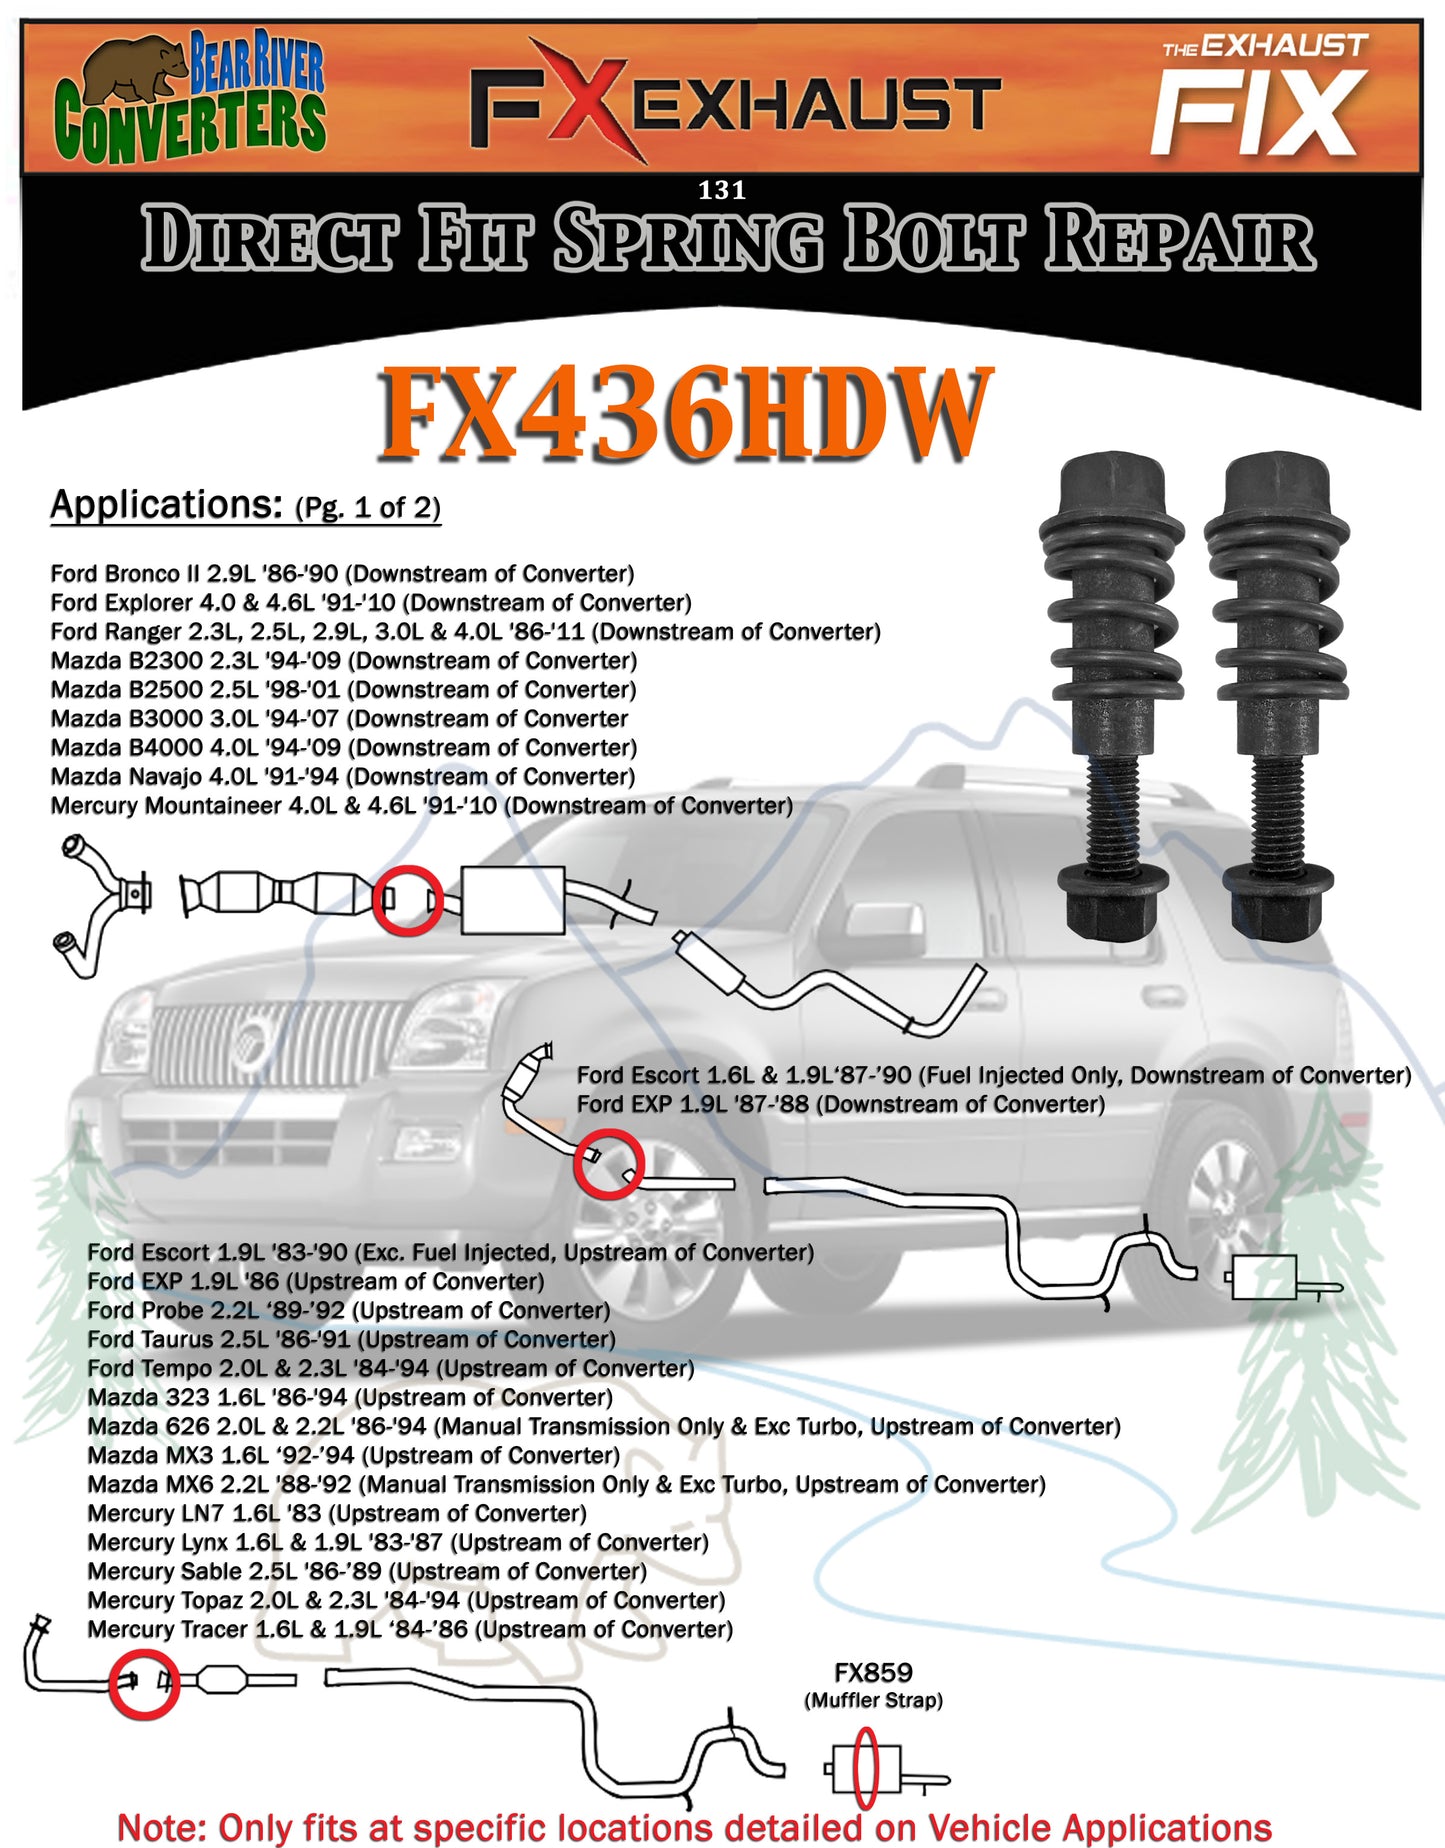 FX436HDW Exhaust Spring Bolt Stud & Nut Hardware Repair Replacement Kit